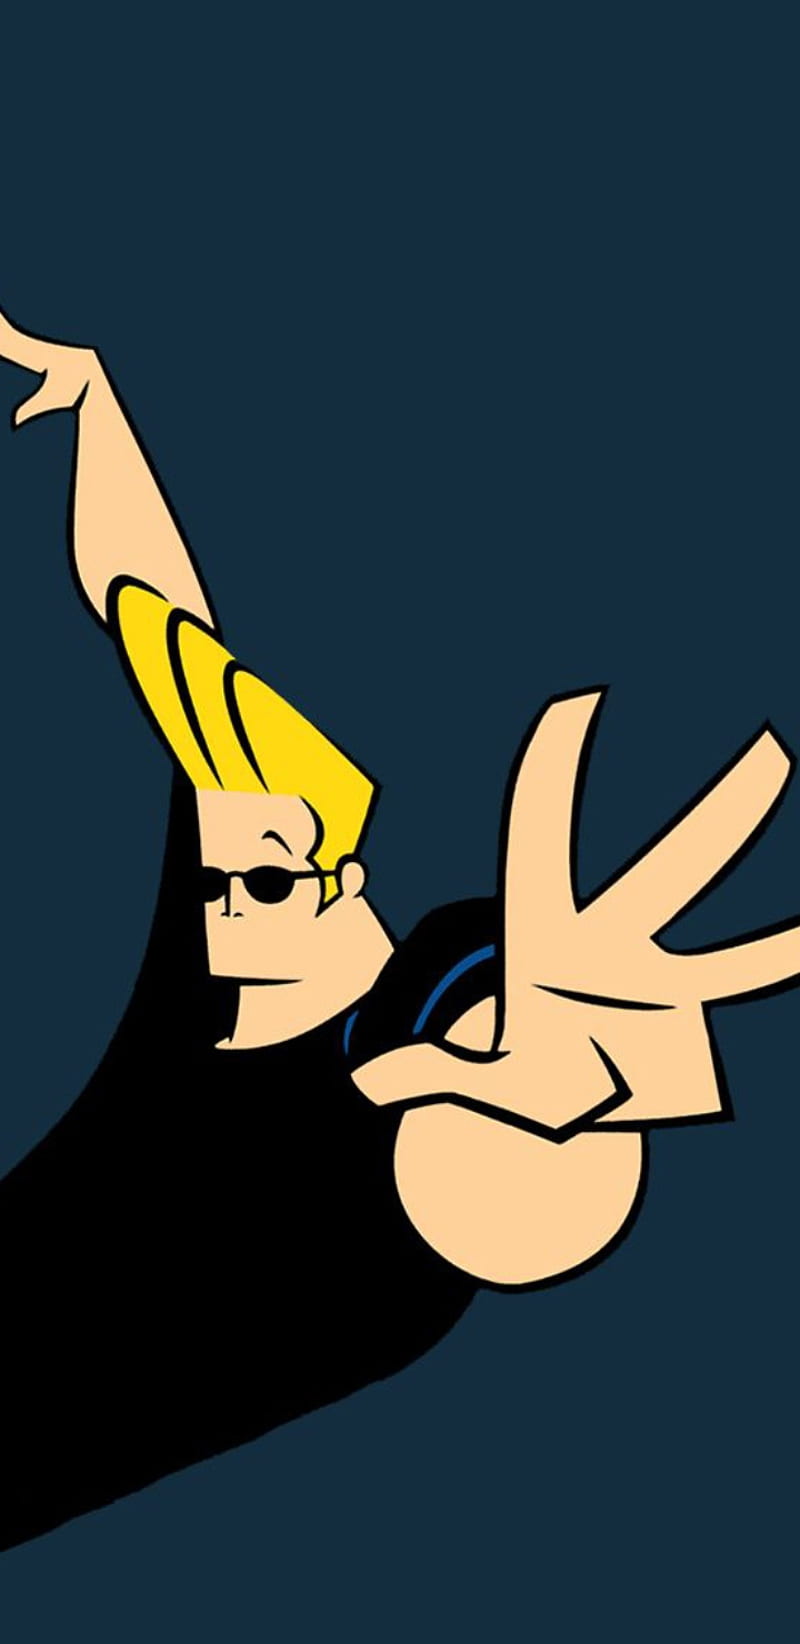 Johnny Bravo, cartoon network, childhood, 90s, chicago, logo, funny, handsome, cool, awesome, HD phone wallpaper